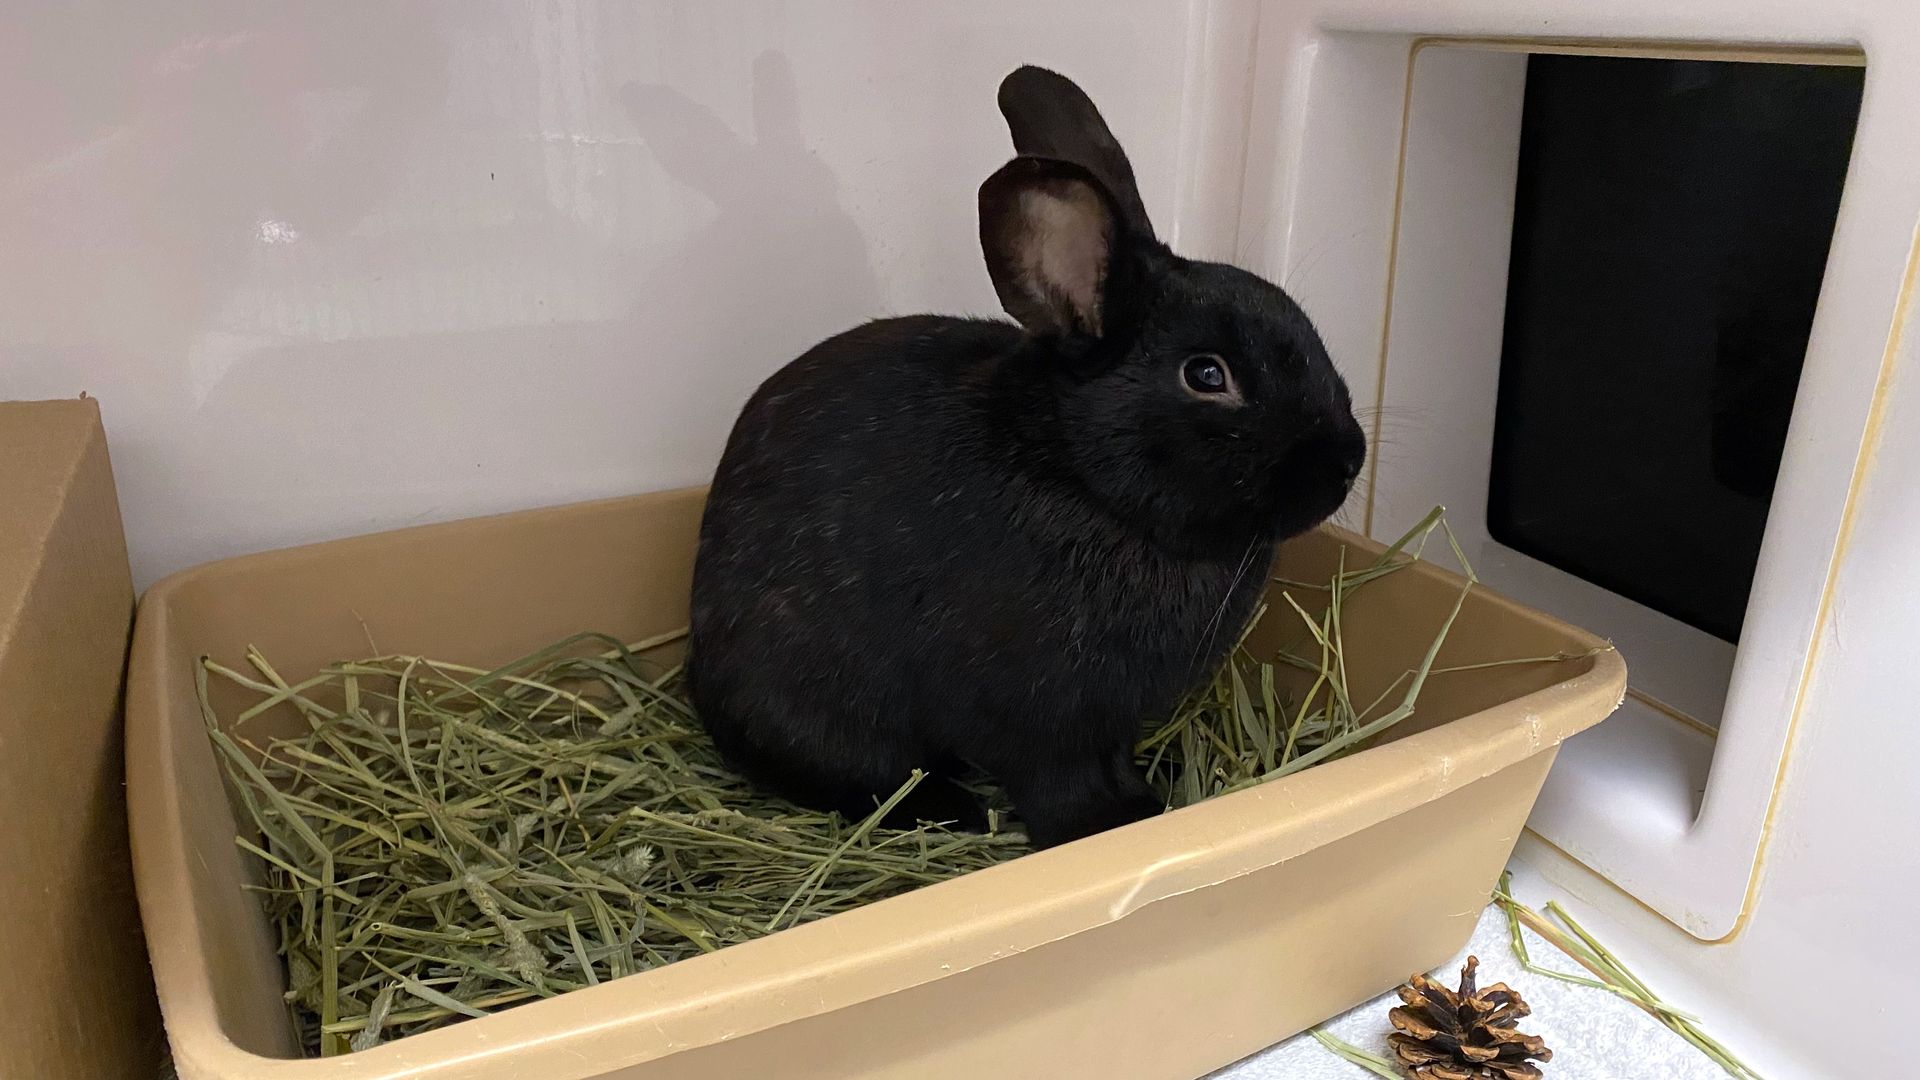 A black rabbit with perked ears sits in a plastic dish of Timothy hay